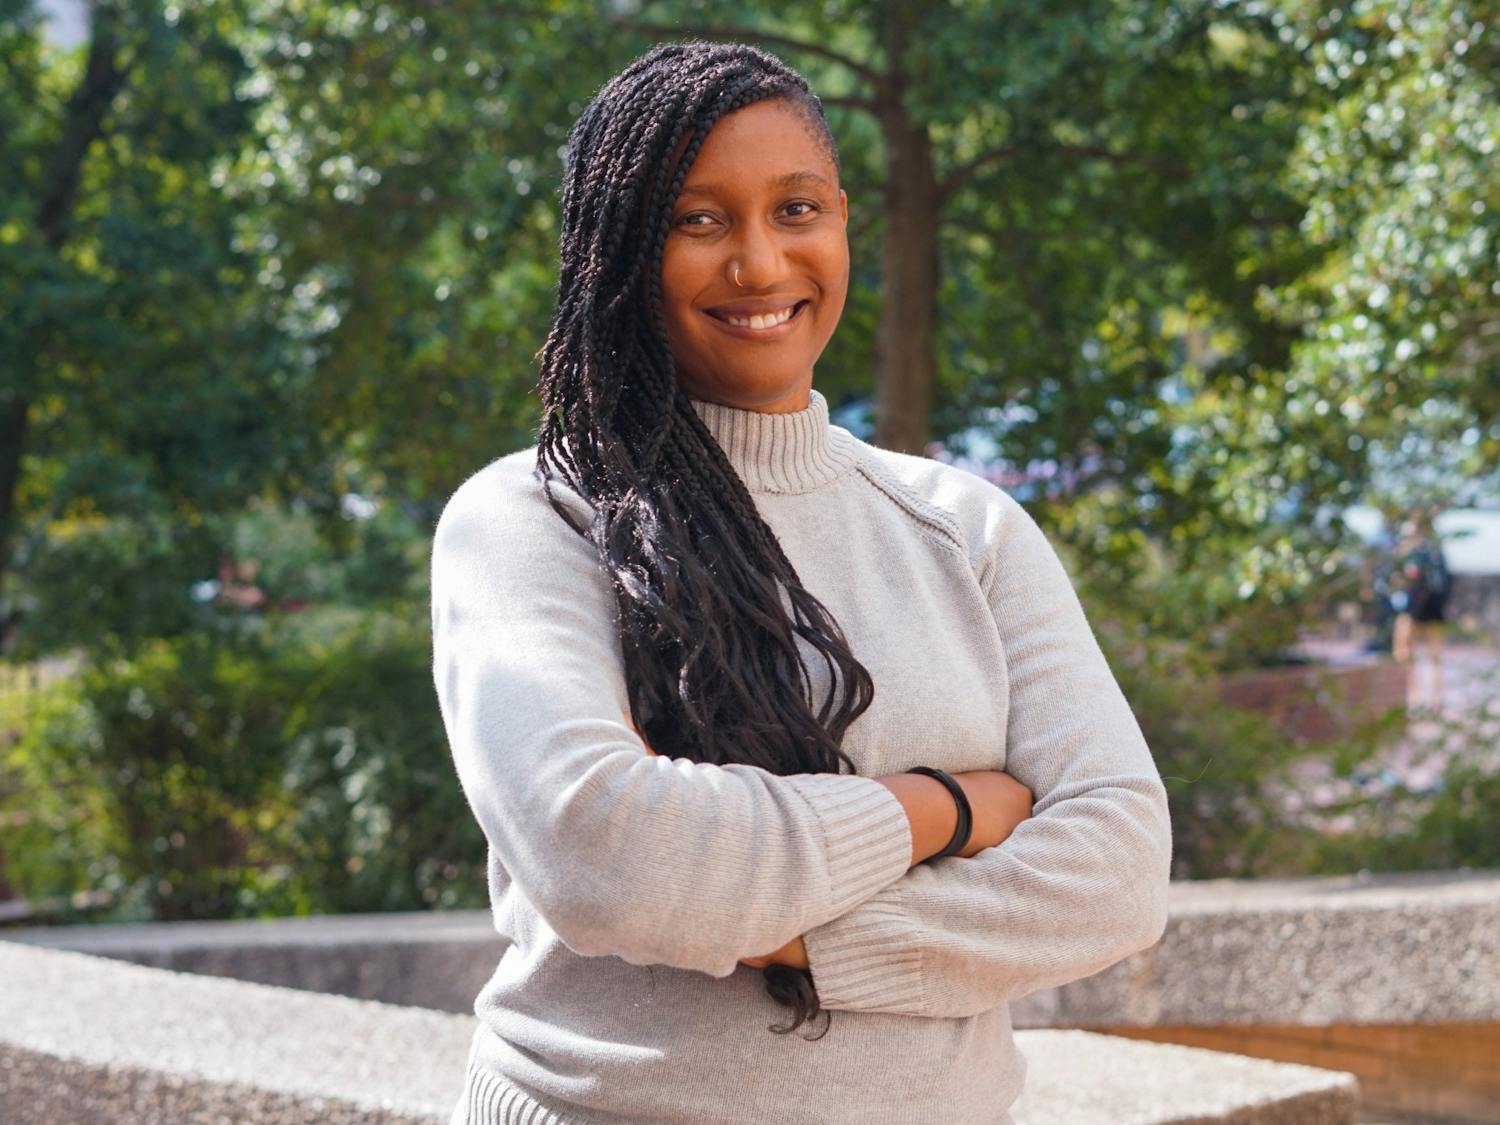 Shannon Malone Gonzalez, Ph.D., is a new UNC associate sociology professor. She researches the health and wellness of communities of color.